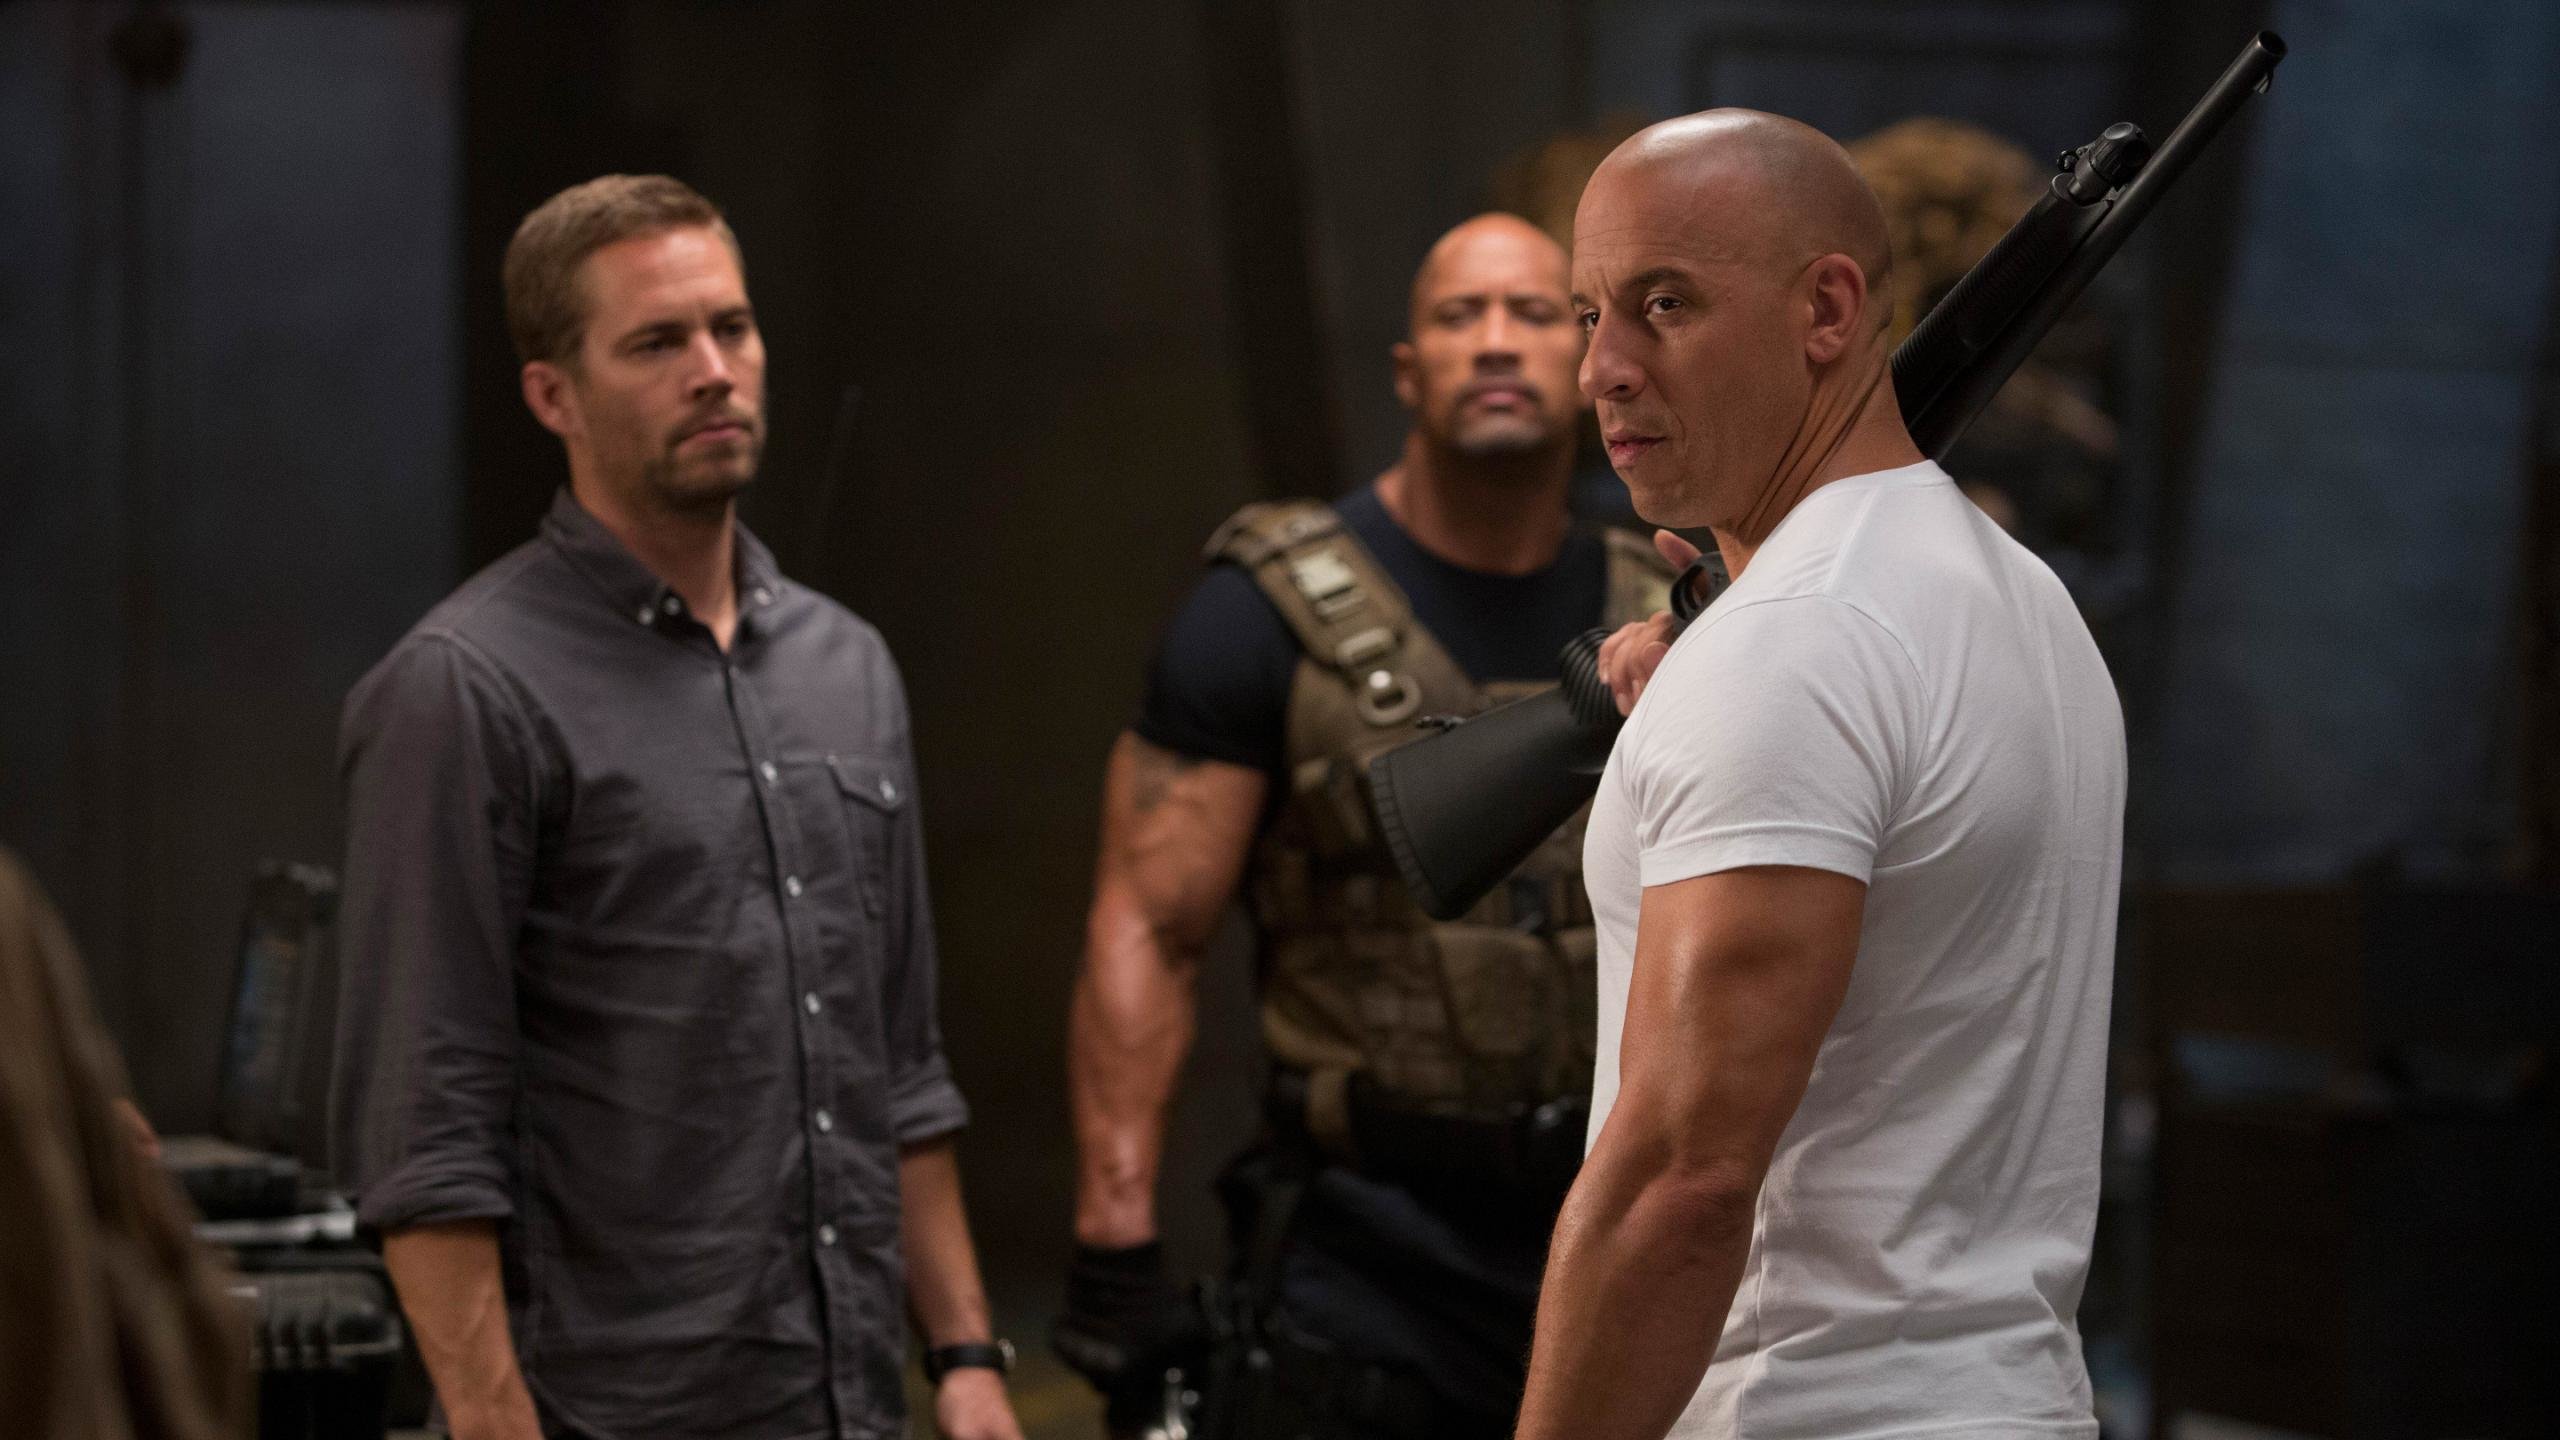 Awesome Fast and Furious 7 free wallpaper ID:62105 for hd 2560x1440 desktop